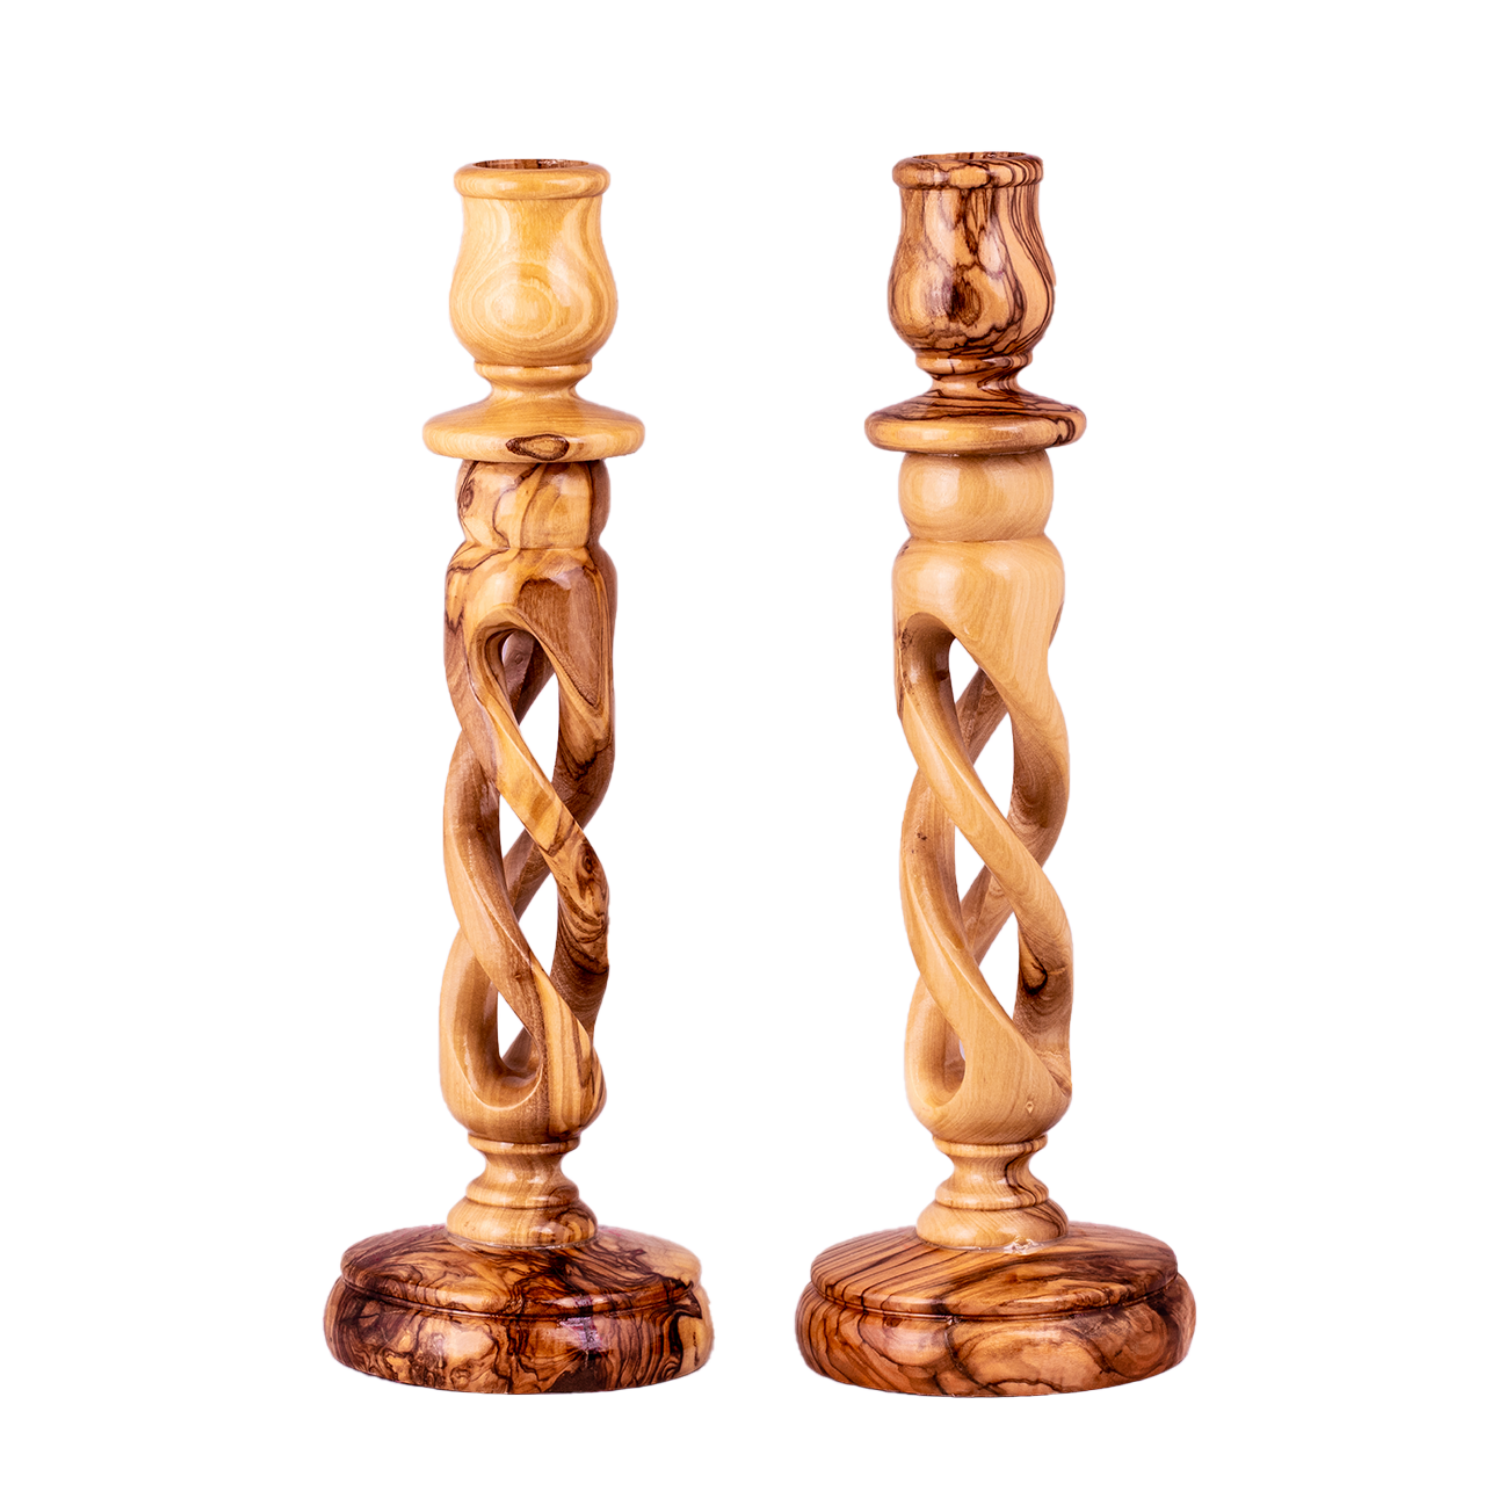 Candle Holders, Available in Different sizes.